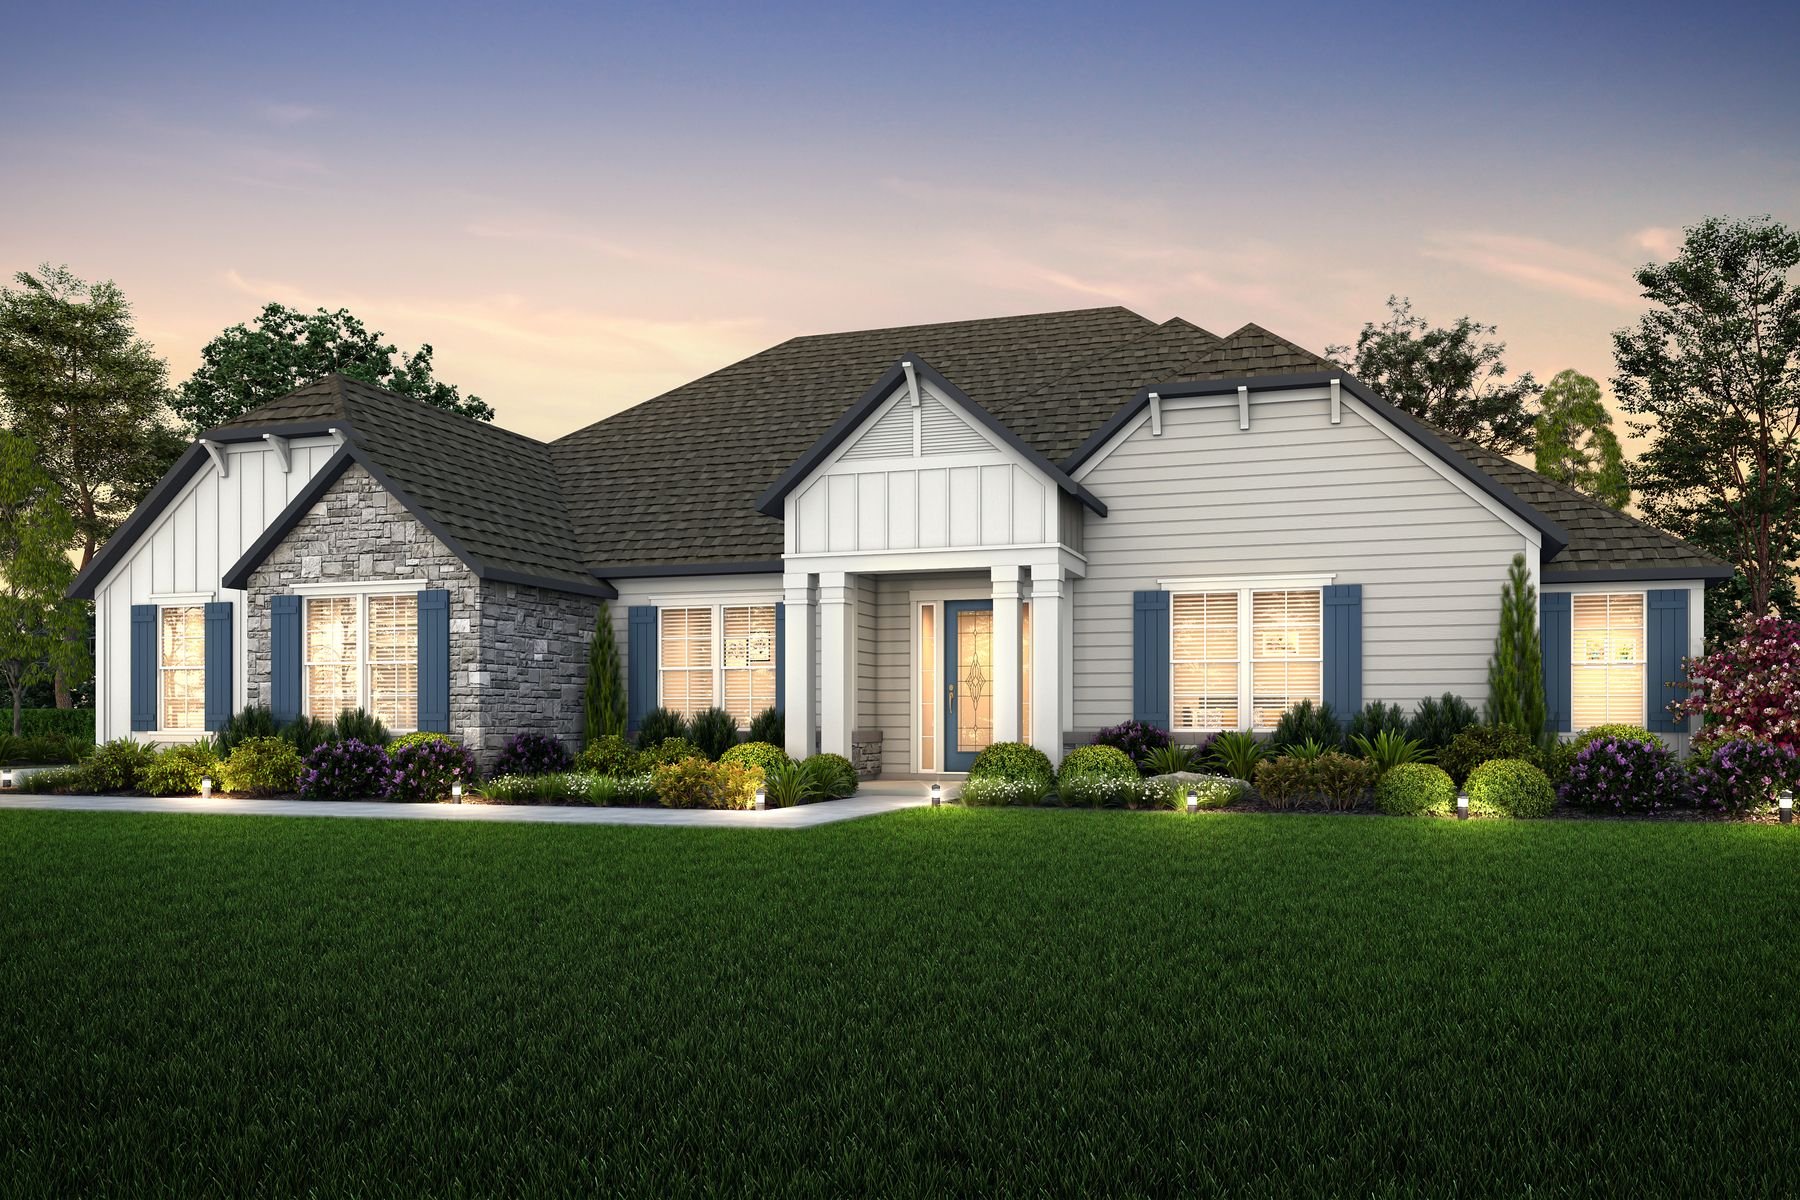 The Mantle Plan by Terrata Homes:The Mantle plan showcases a stunning exterior with a decadent front entry way and lush landscaping.